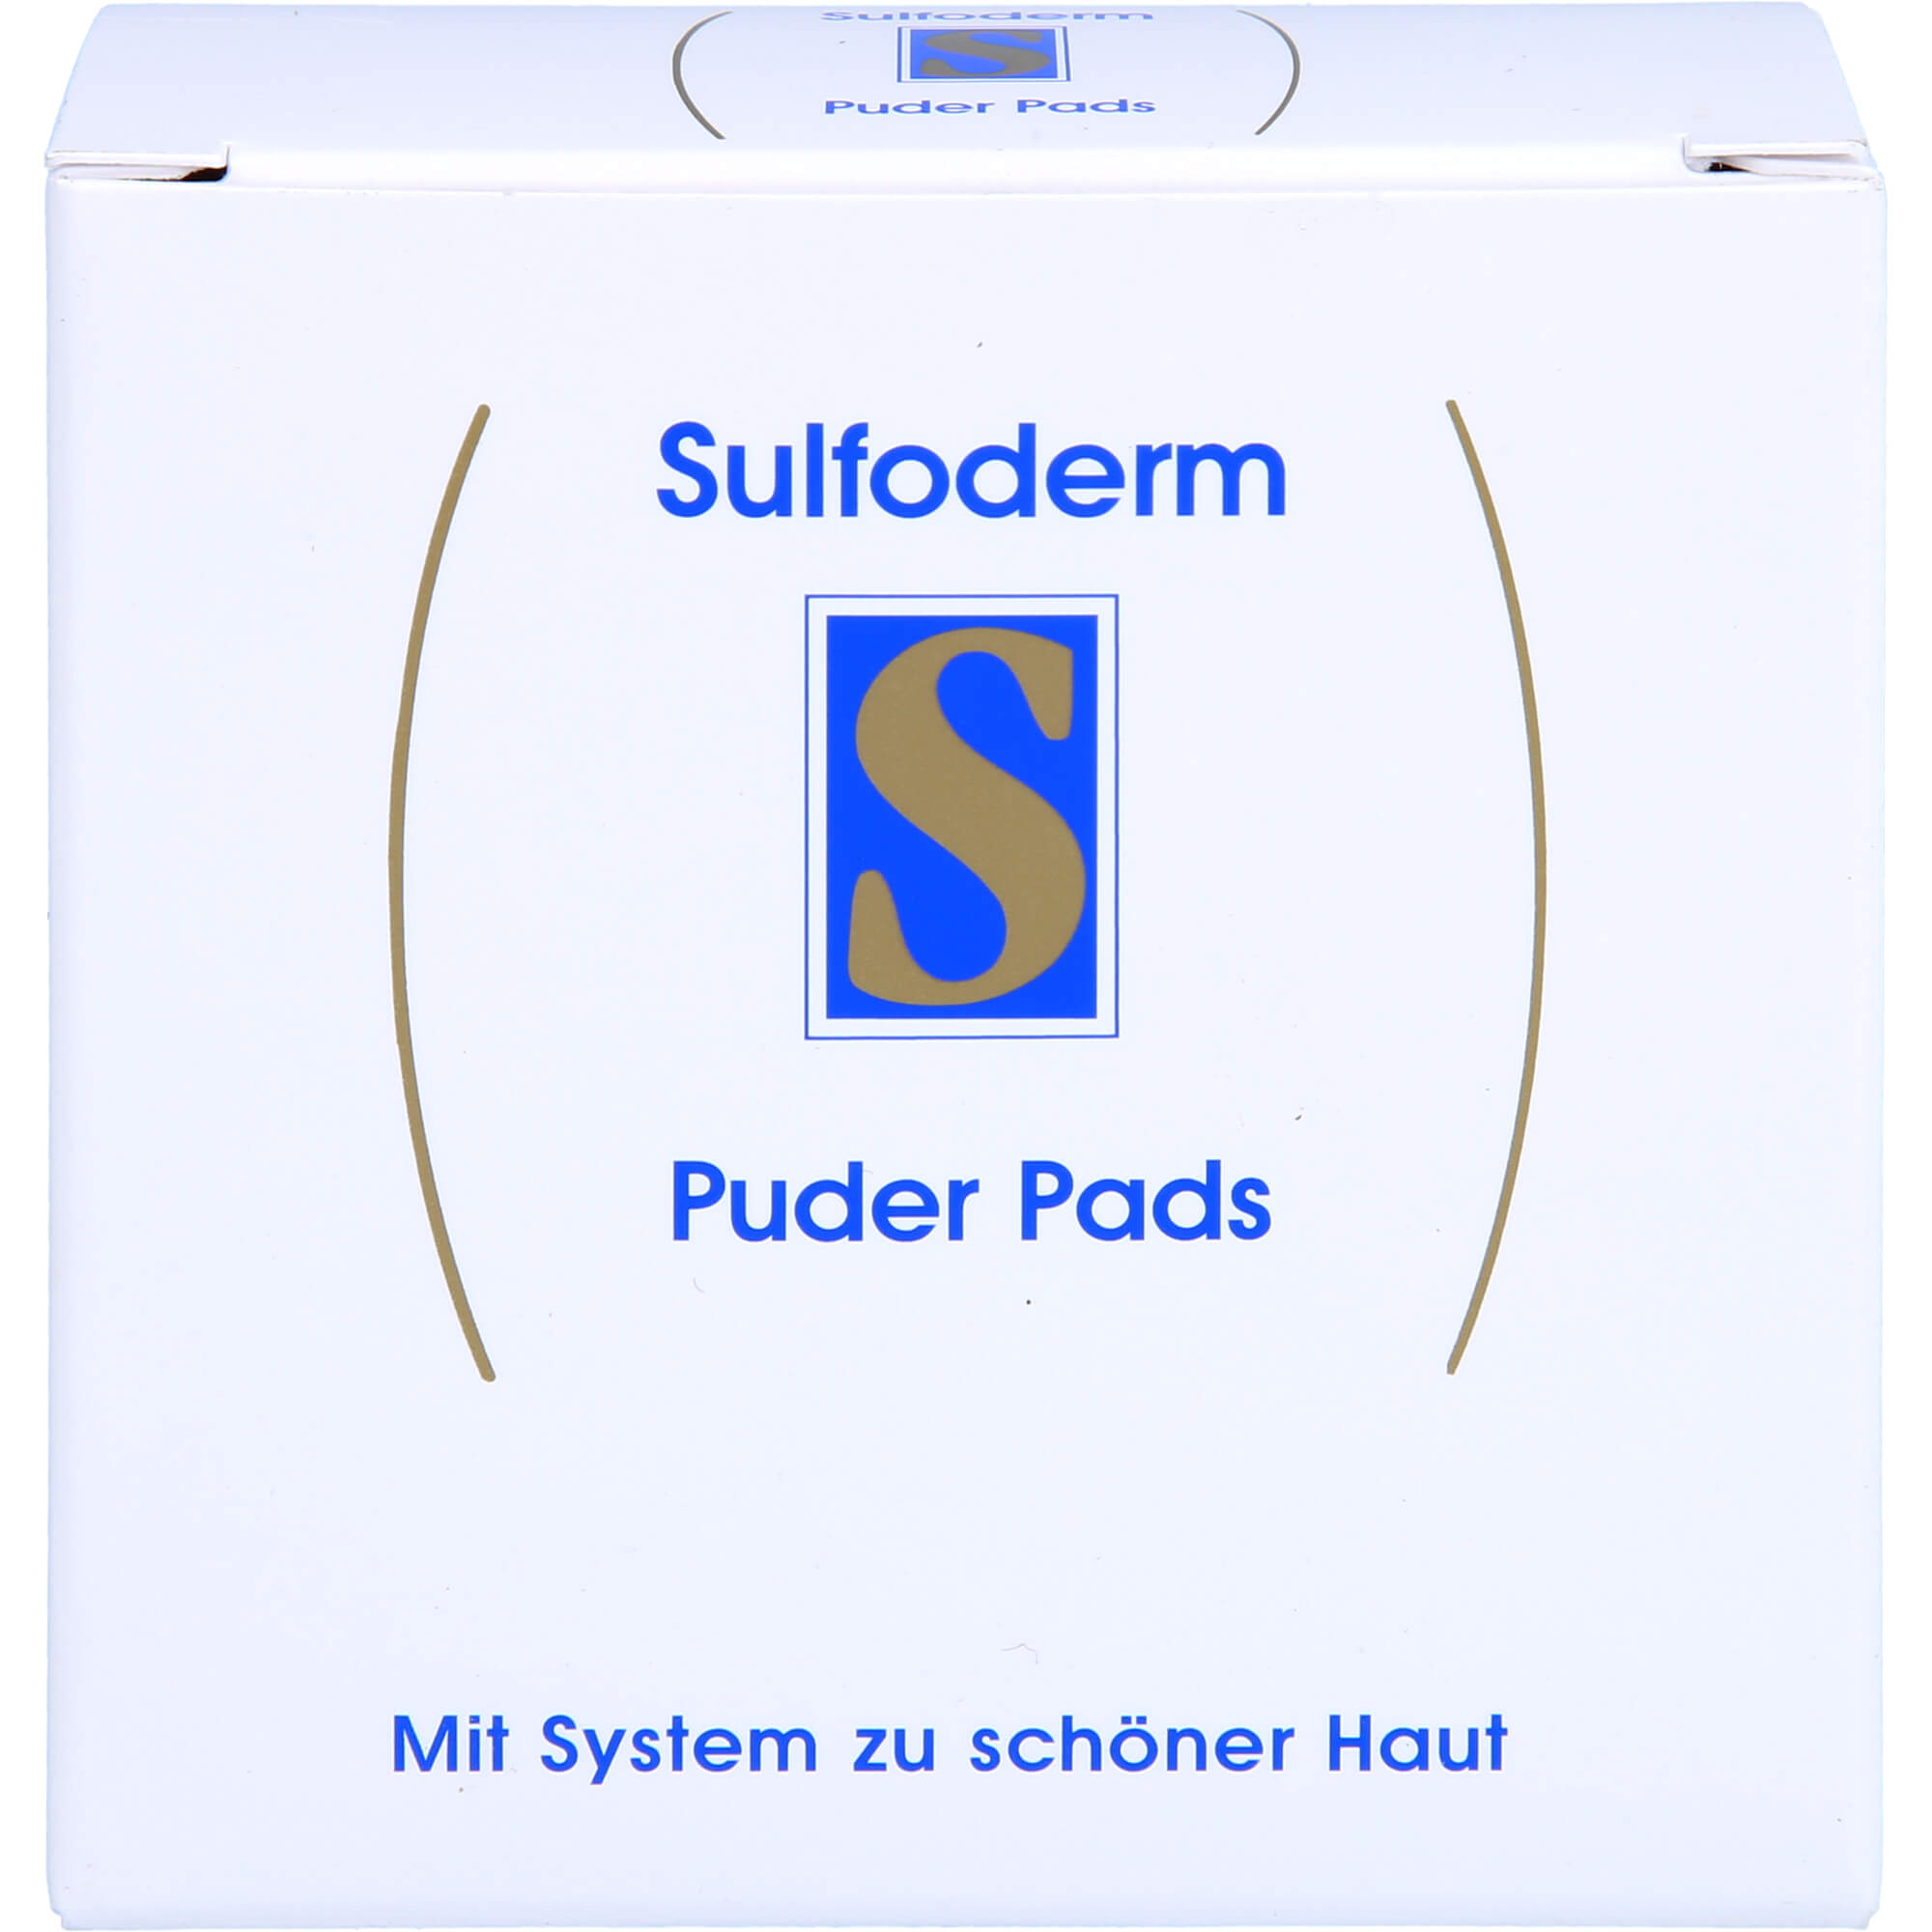 SULFODERM S Puder Pads